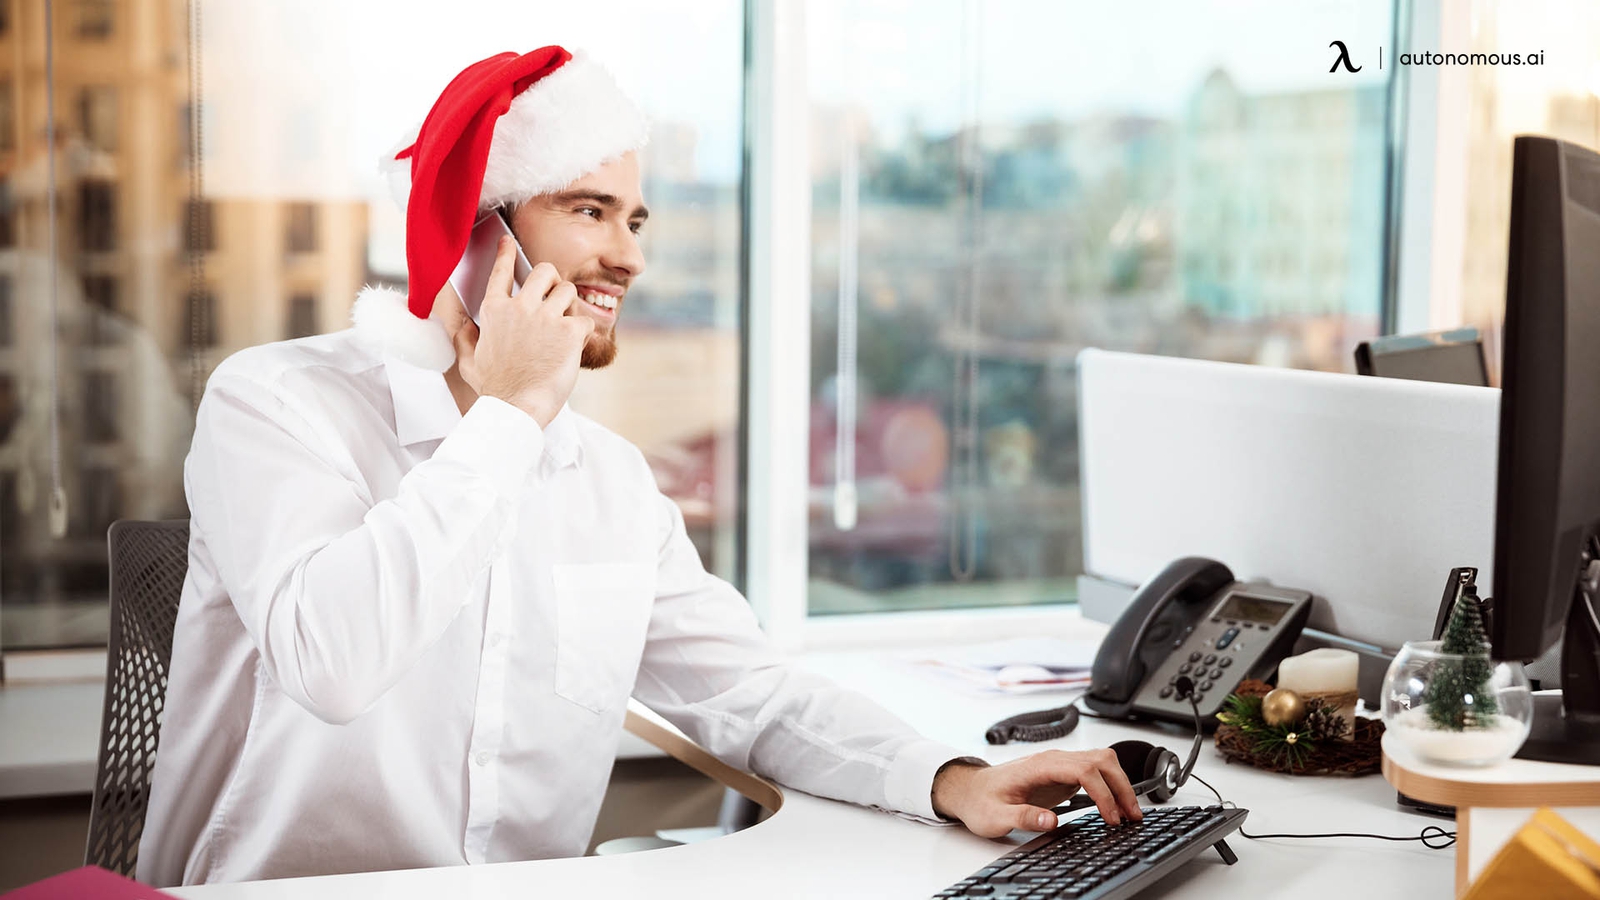 5 Tips to Stay Focused at Work when Christmas is Approaching